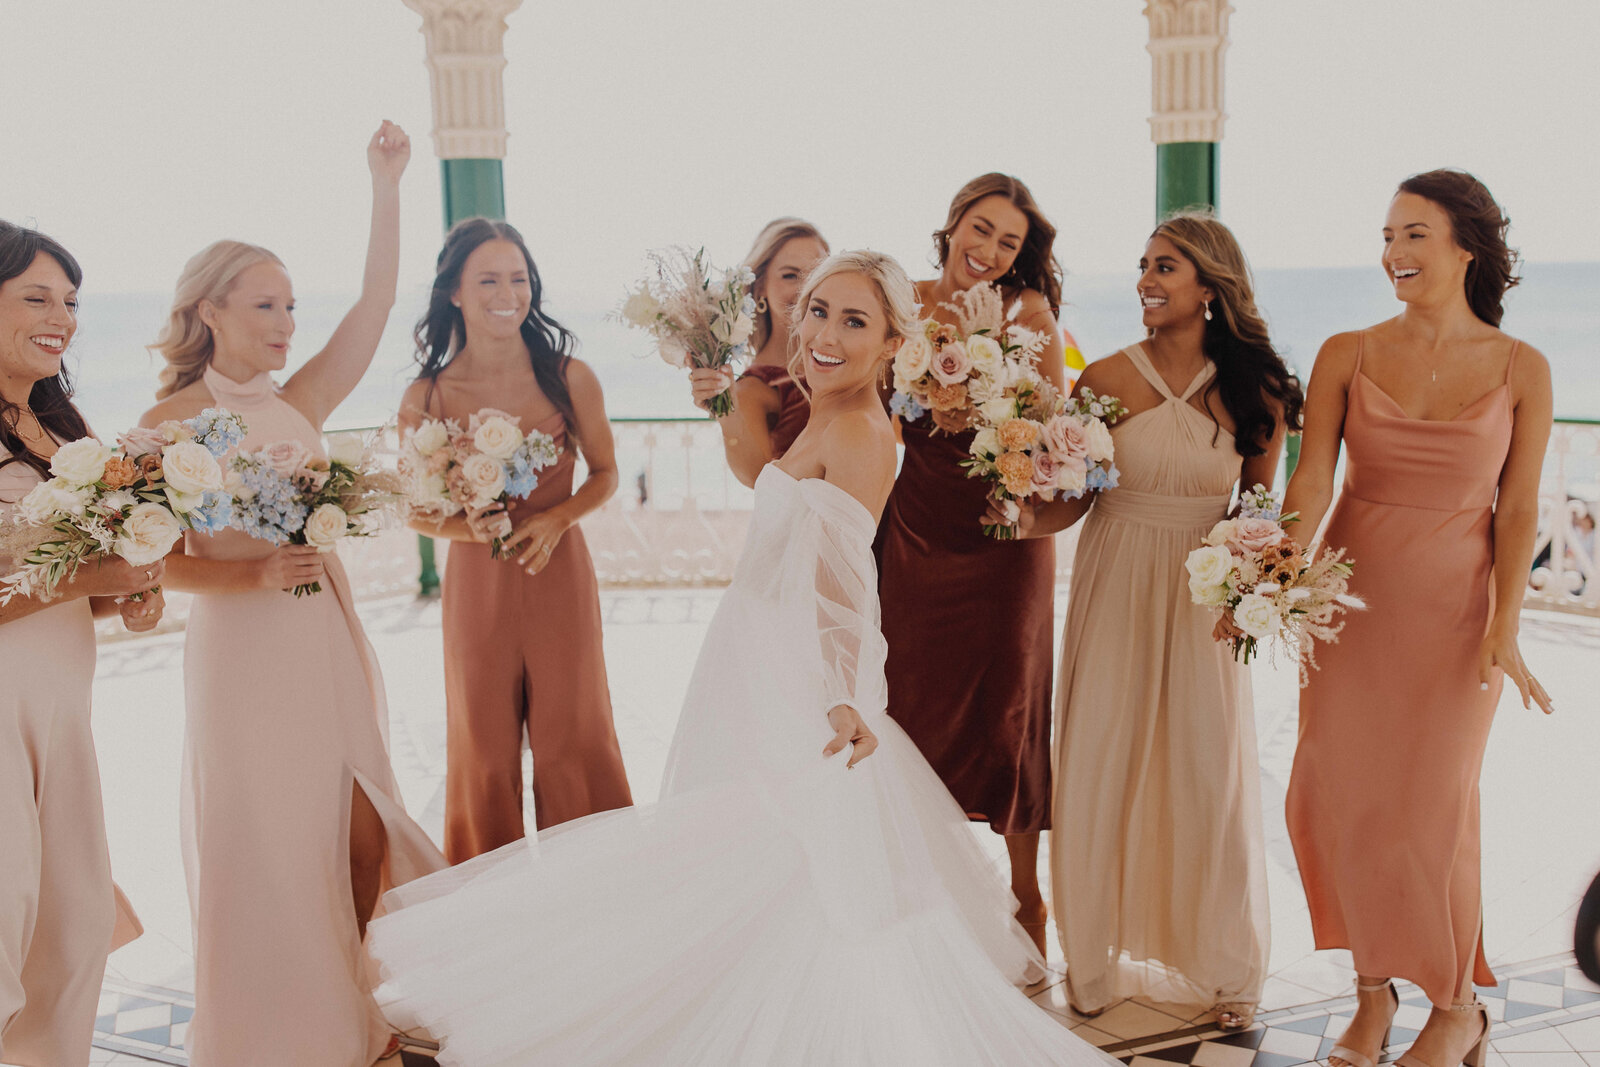 A Bride surrounded by her bridesmaids each holding their bridesmaid bouquets celebrating and smiling at their West Sussex wedding venue